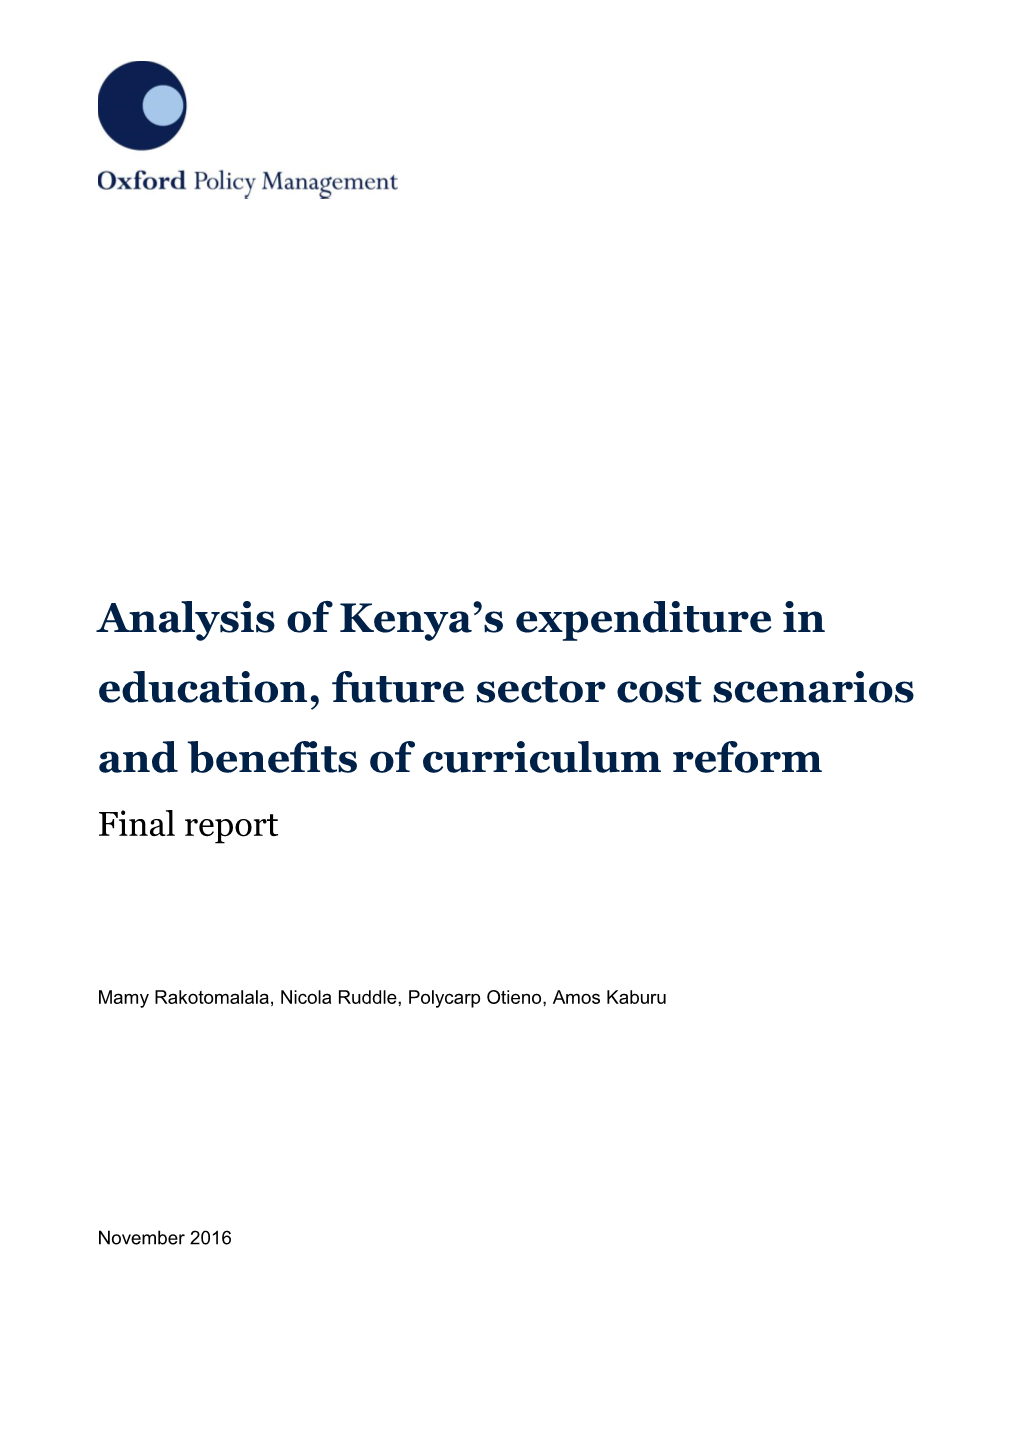 Analysis of Kenya's Expenditure in Education, Future Sector